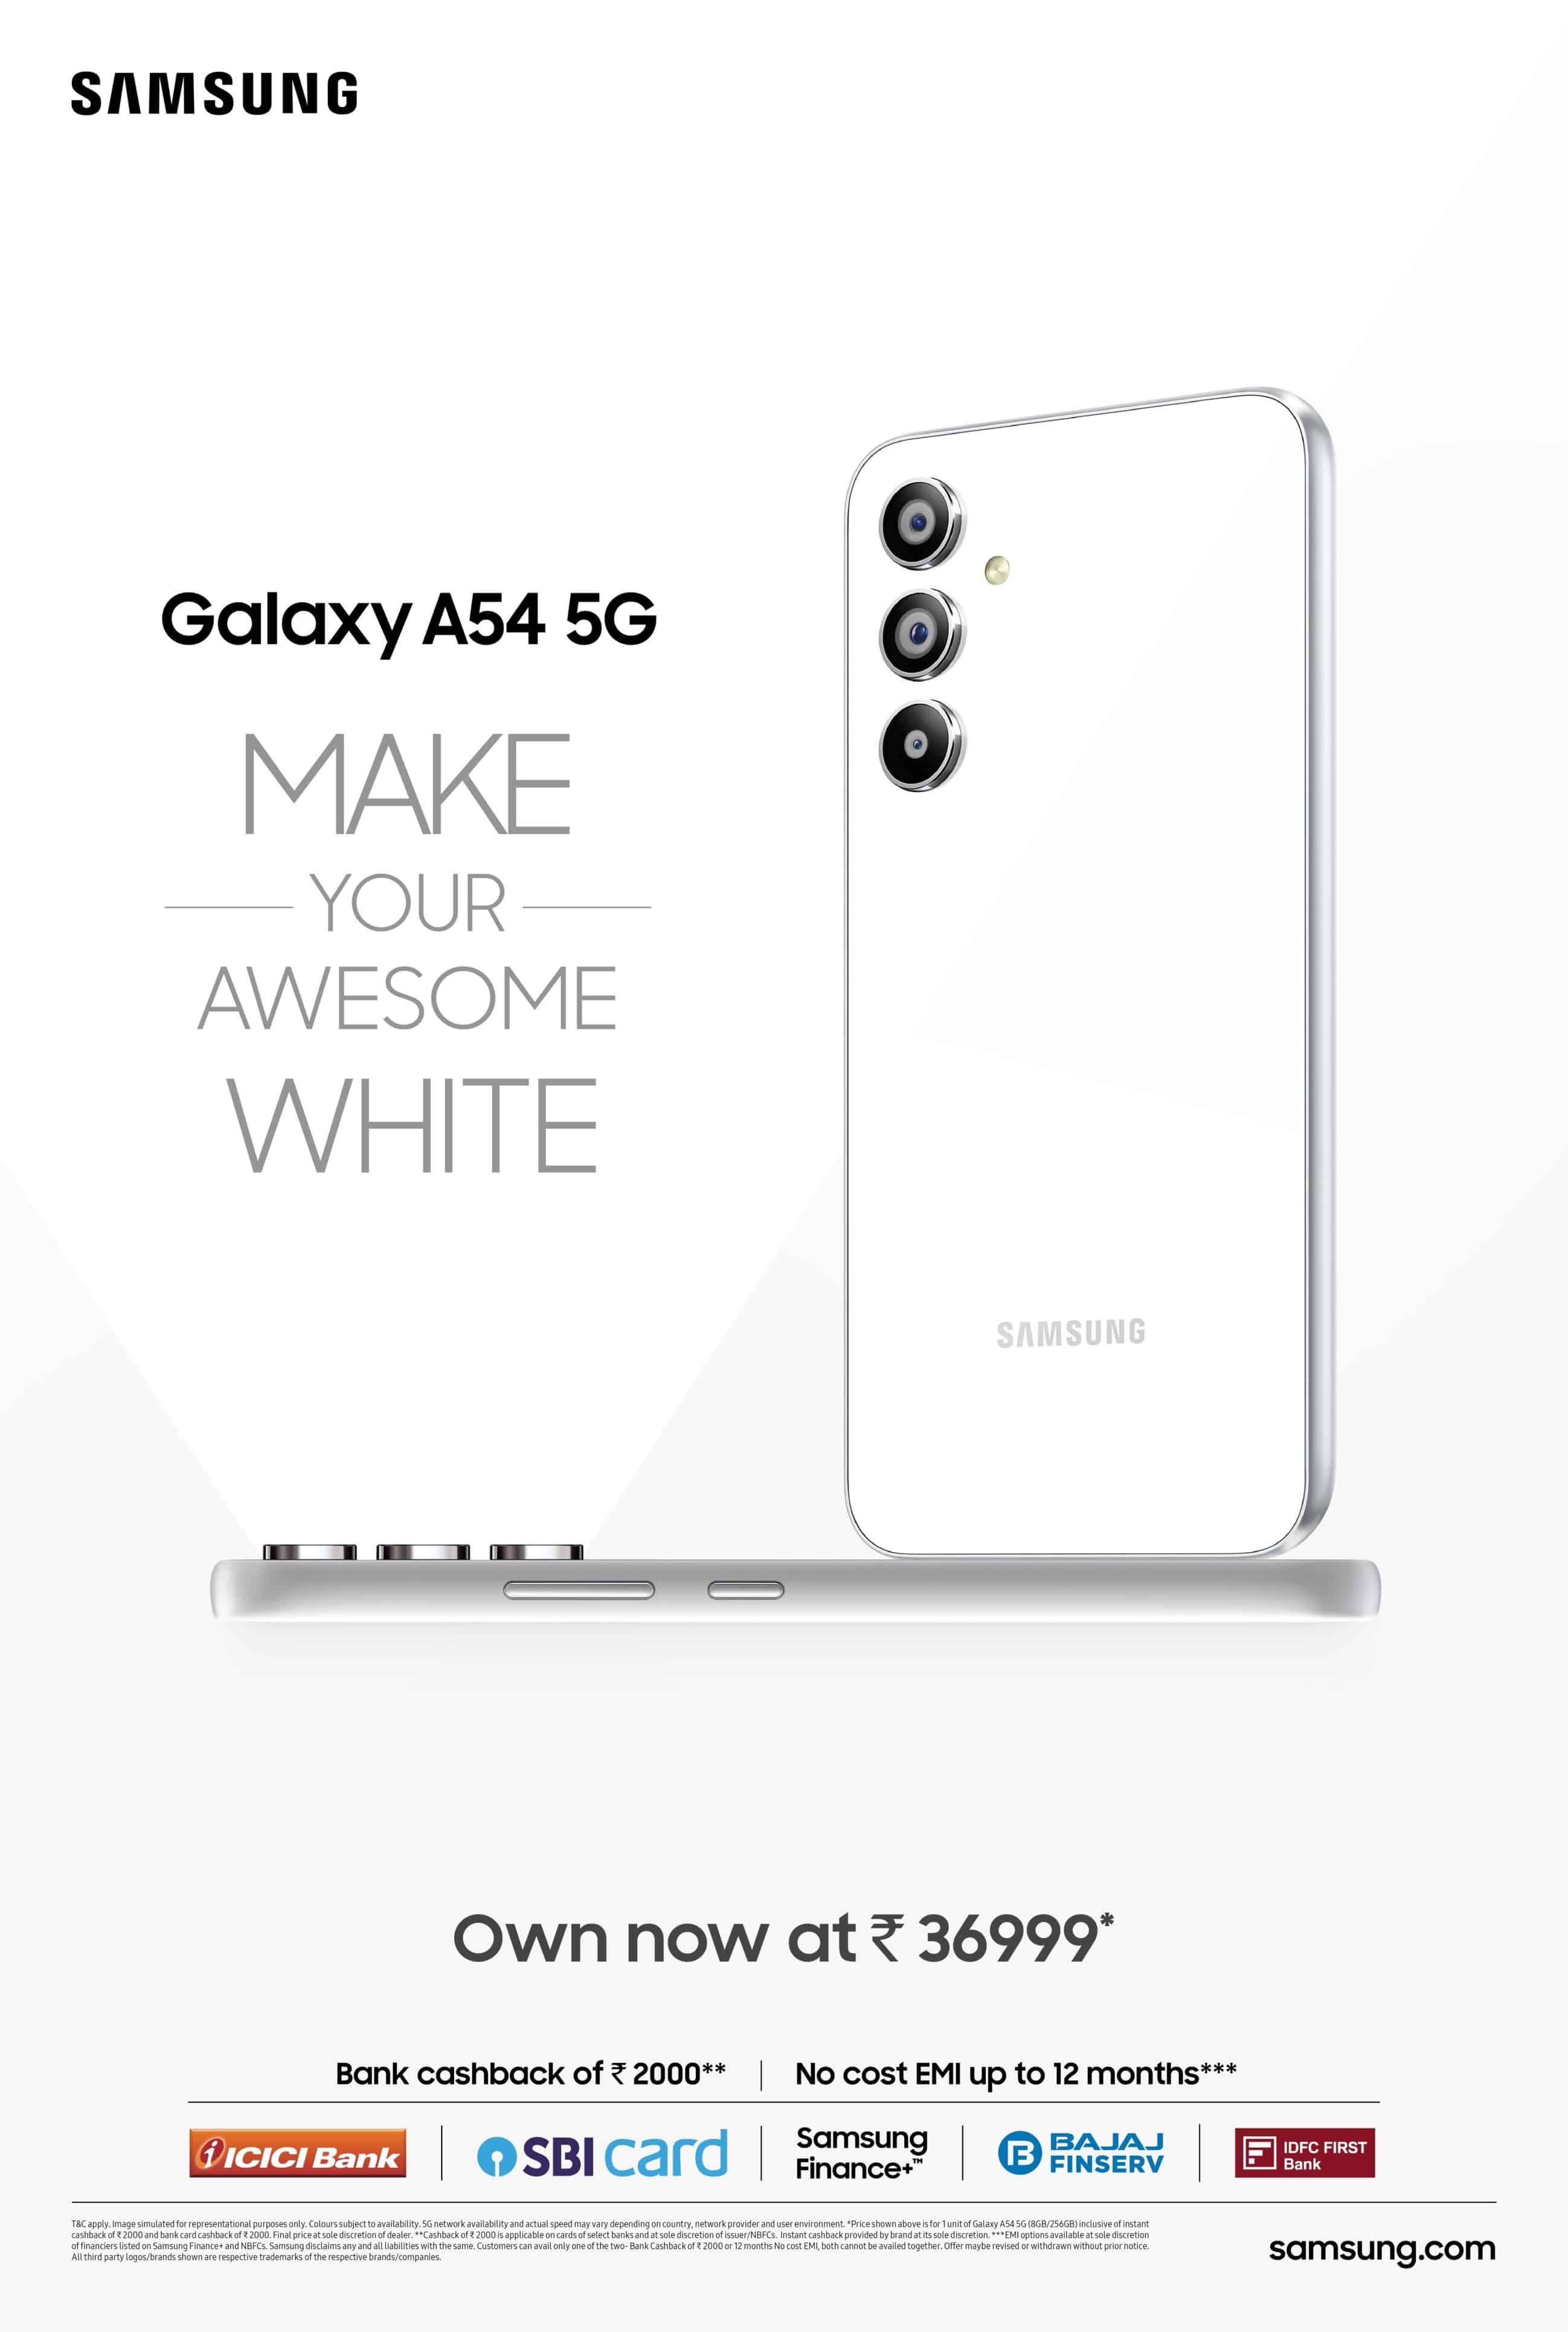 Samsung Galaxy A54 5G Price , Sale Details & Offers